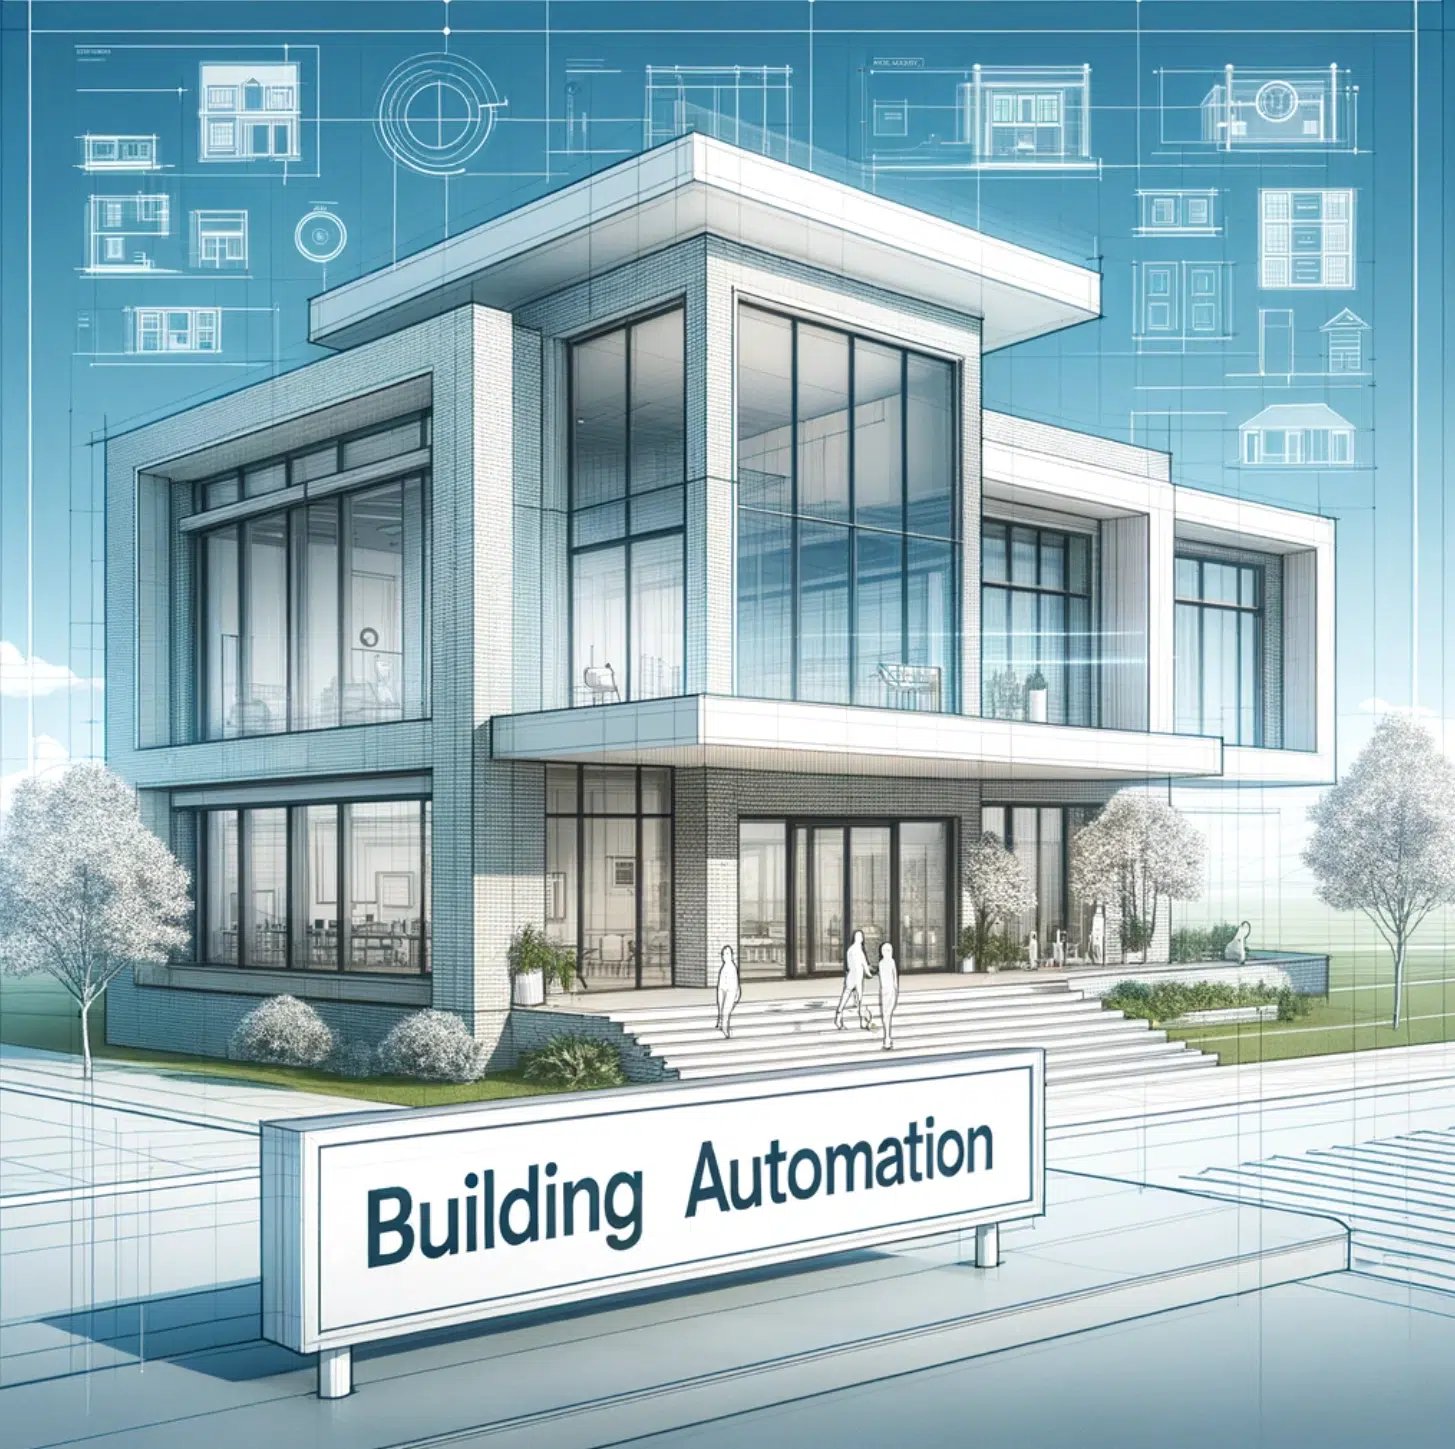 Revolutionising Community Centers with Building Automation Systems